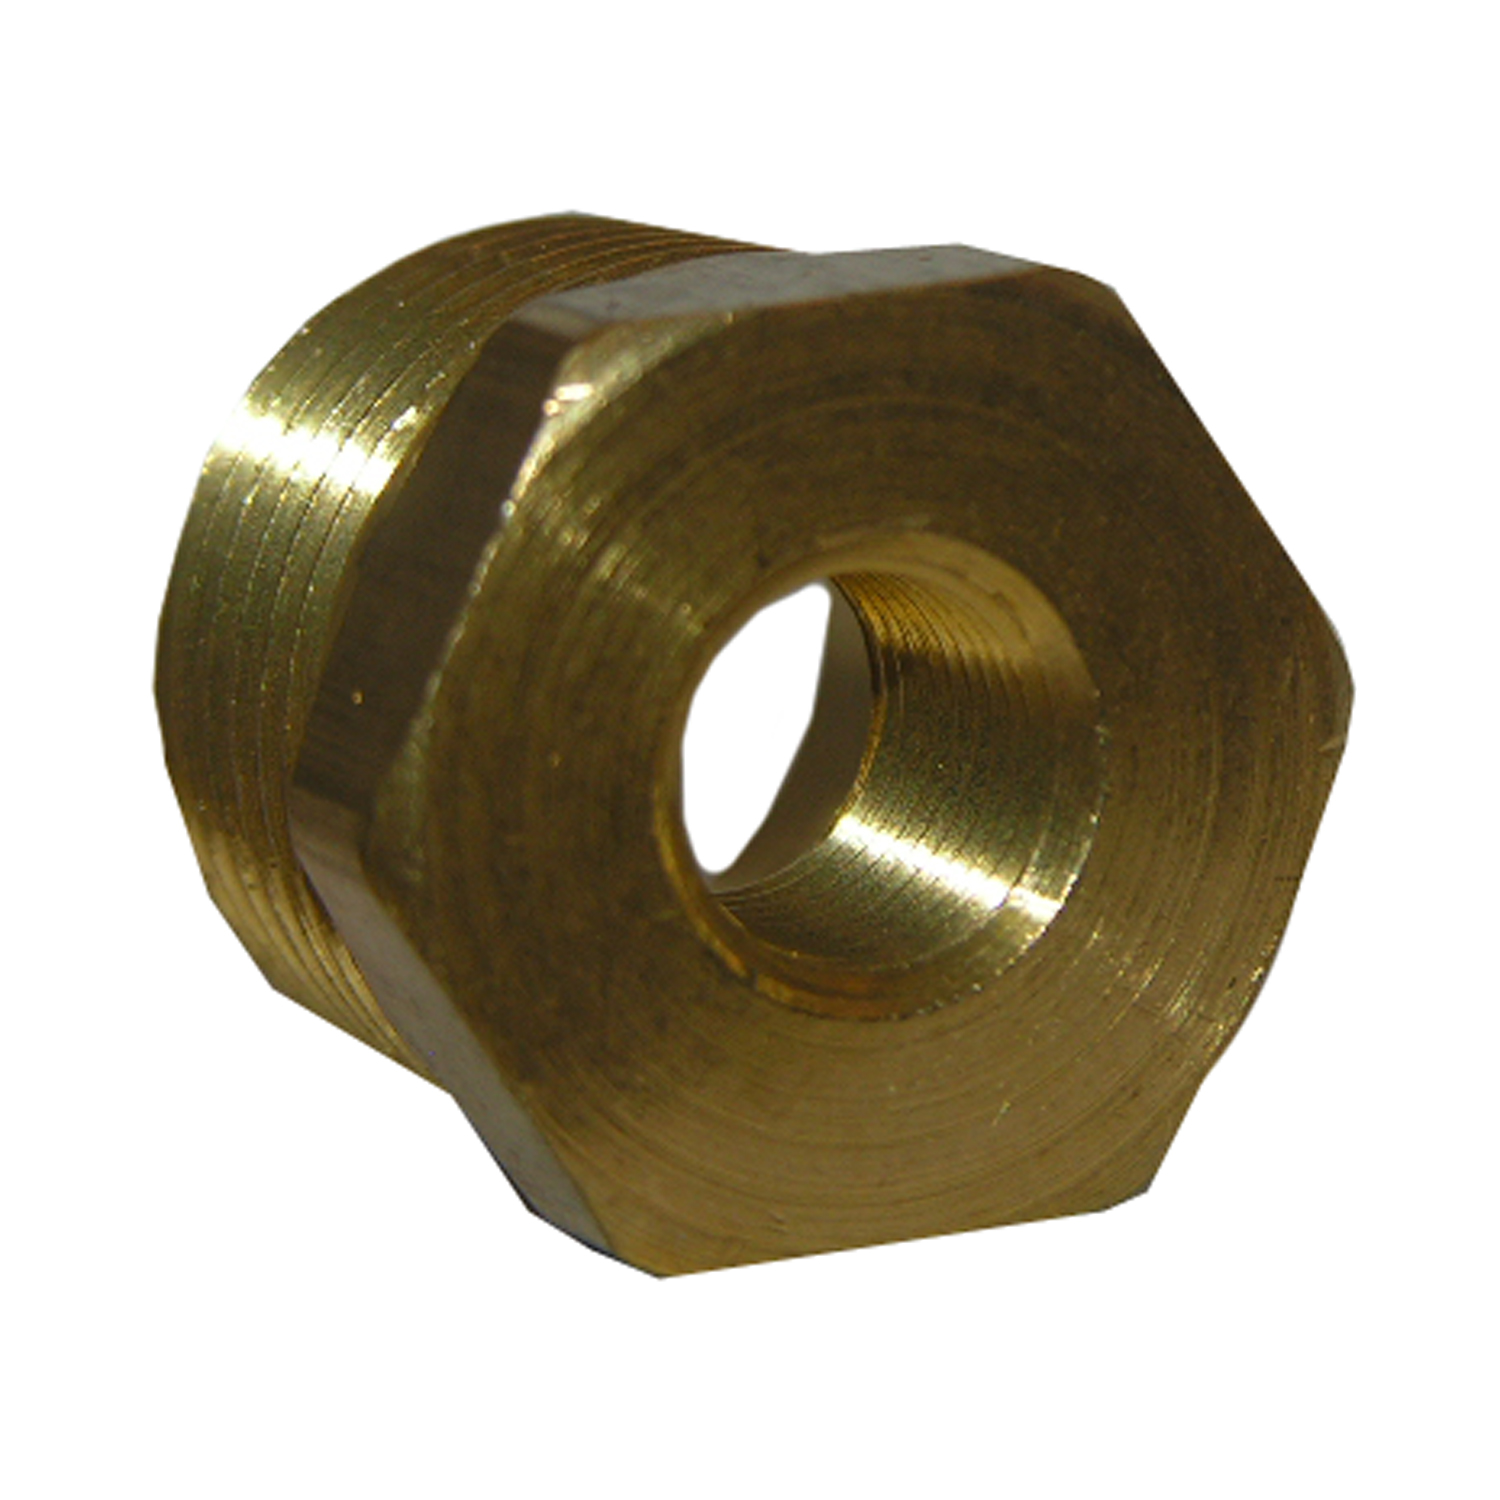 17-9247 Hex Pipe Bushing, 1/2 x 1/8 in, MPT x FPT, Brass, 125 psi Pressure